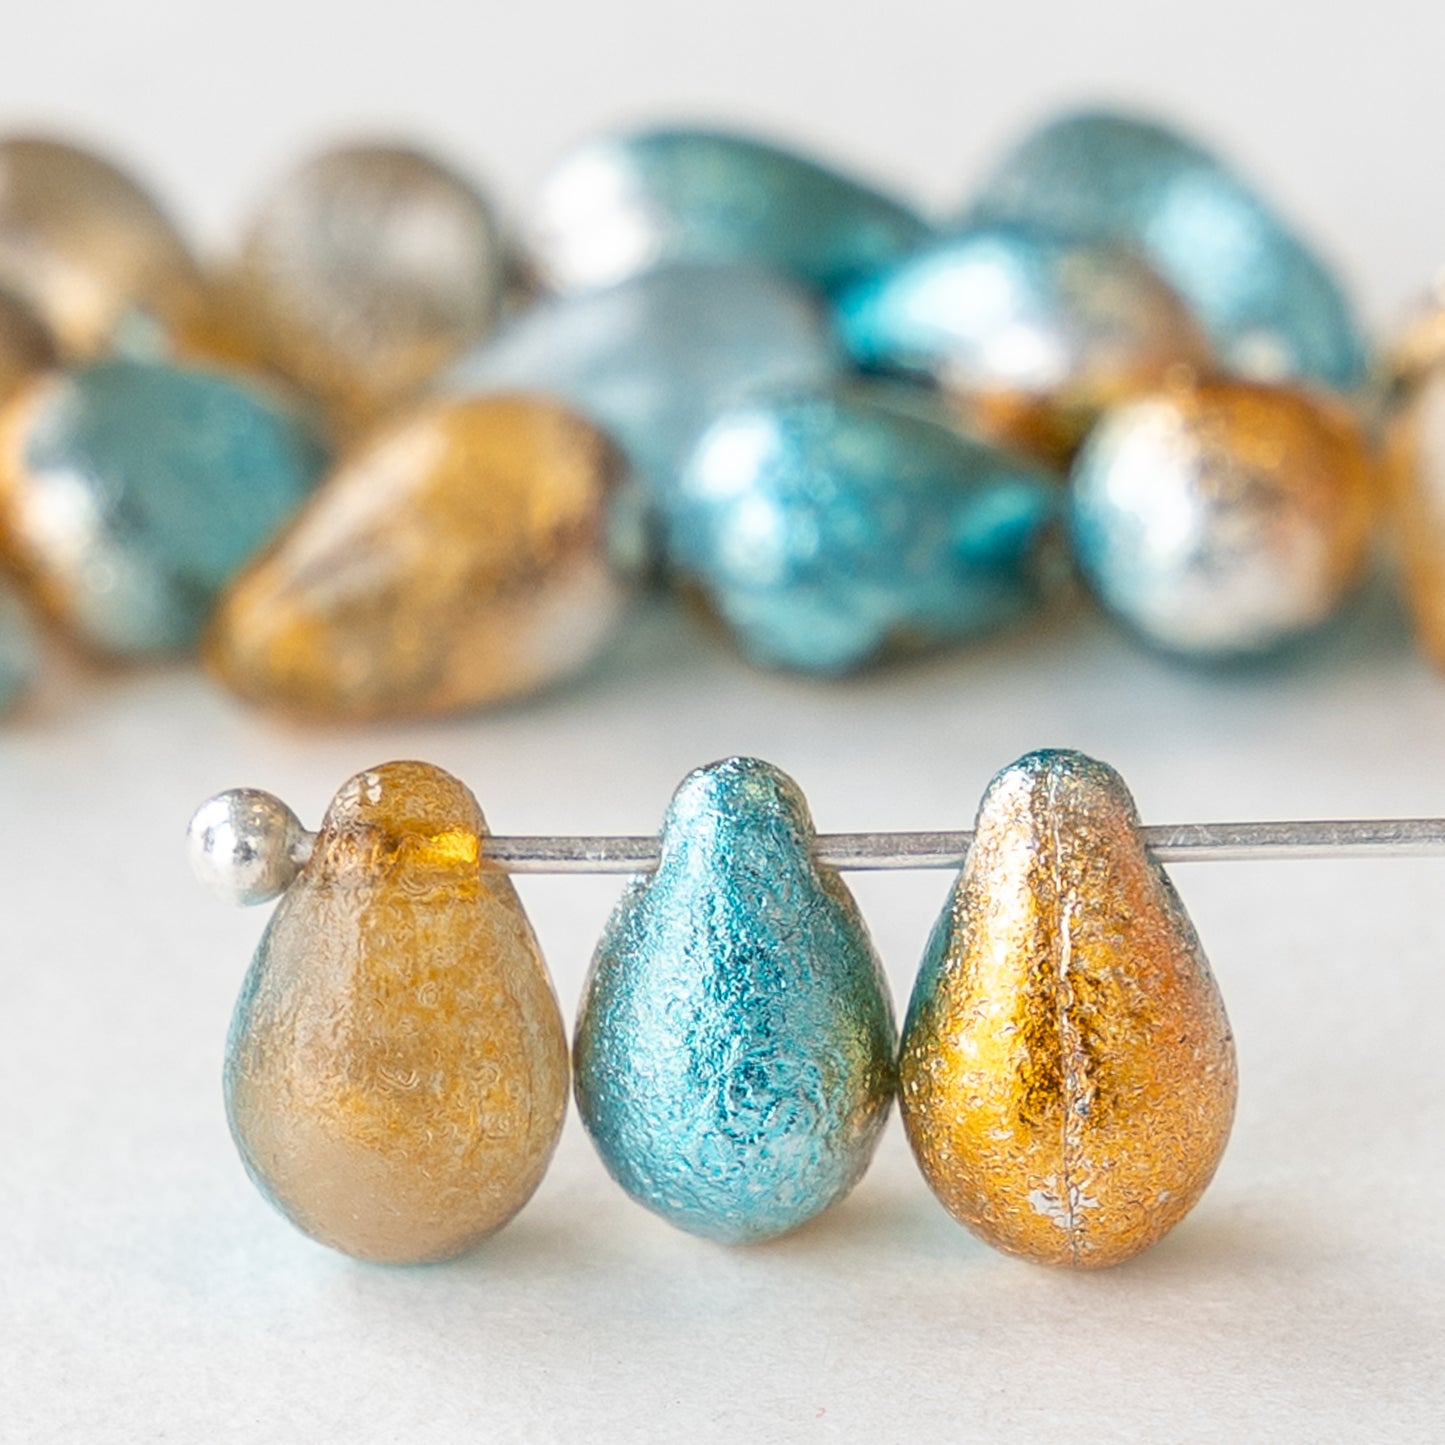 6x9mm Glass Teardrop Beads - Etched Orange Teal - 25 Beads